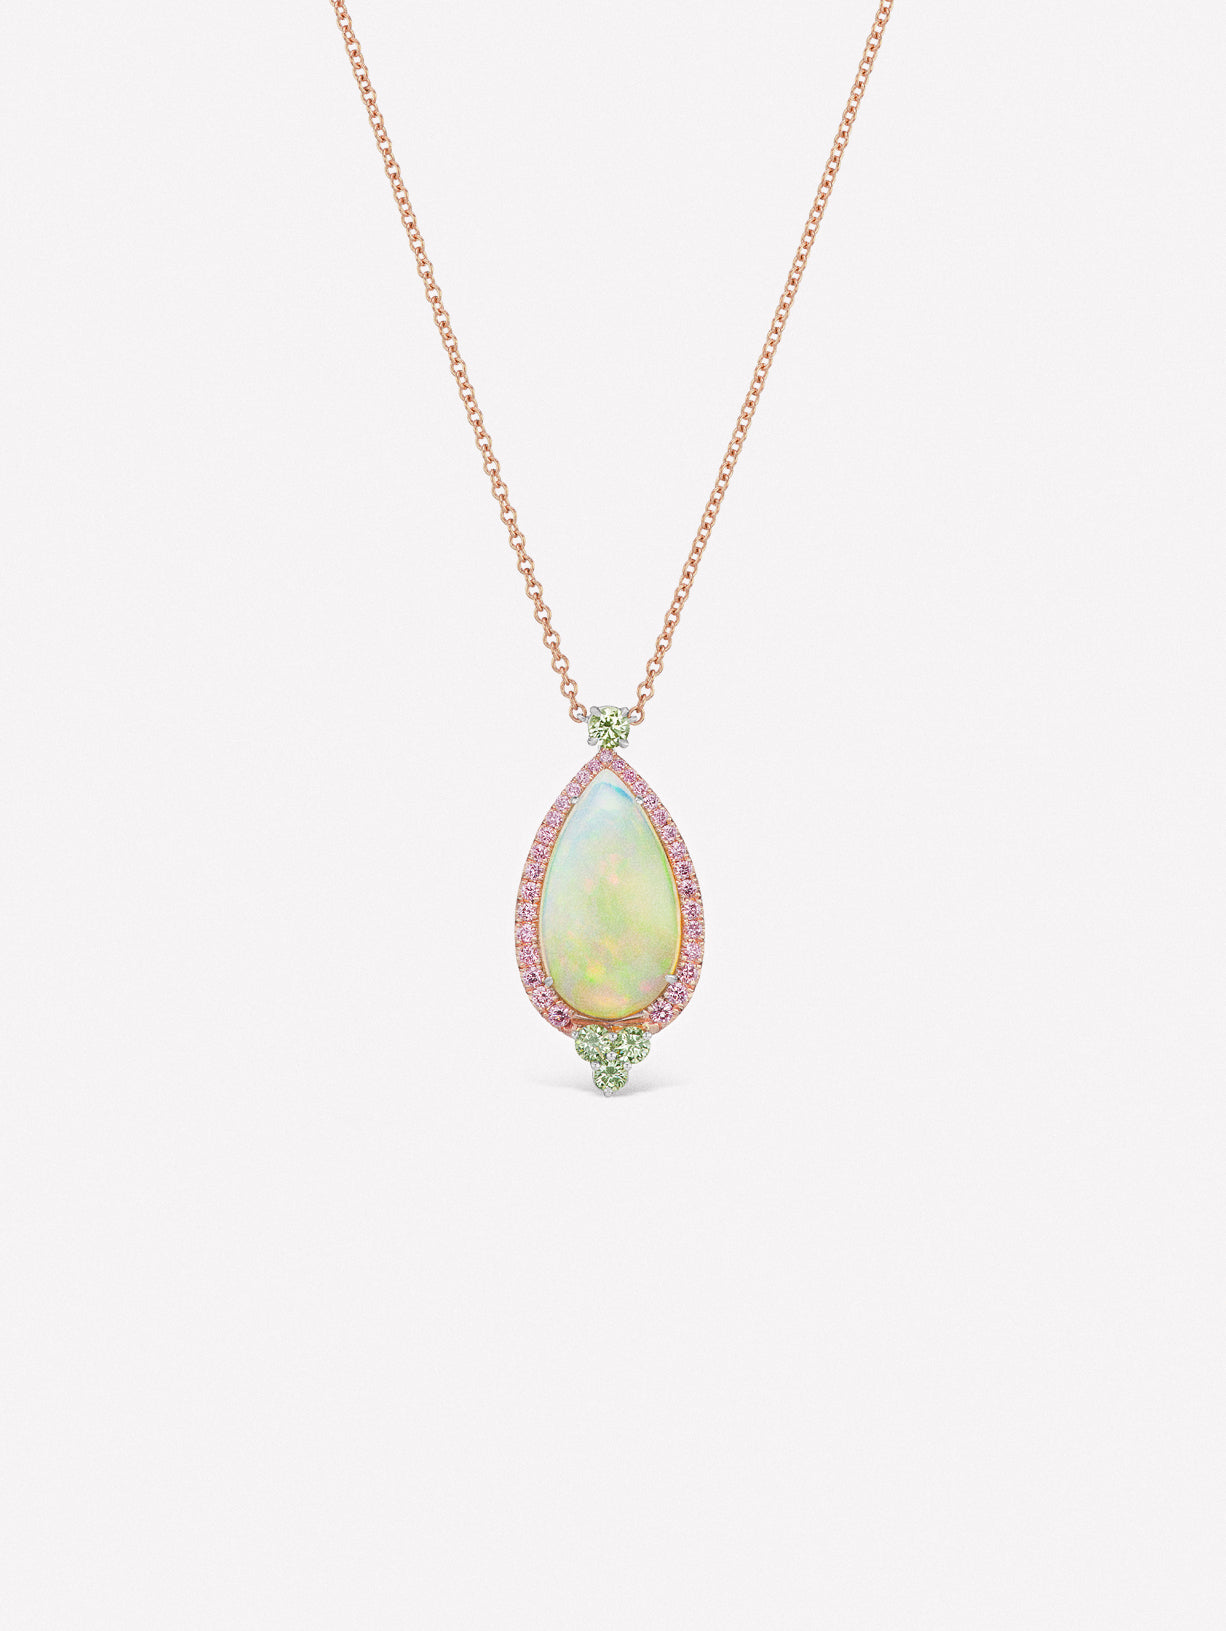 Cabochon opal pendant surrounded by Argyle pink diamonds and green diamond accents. 